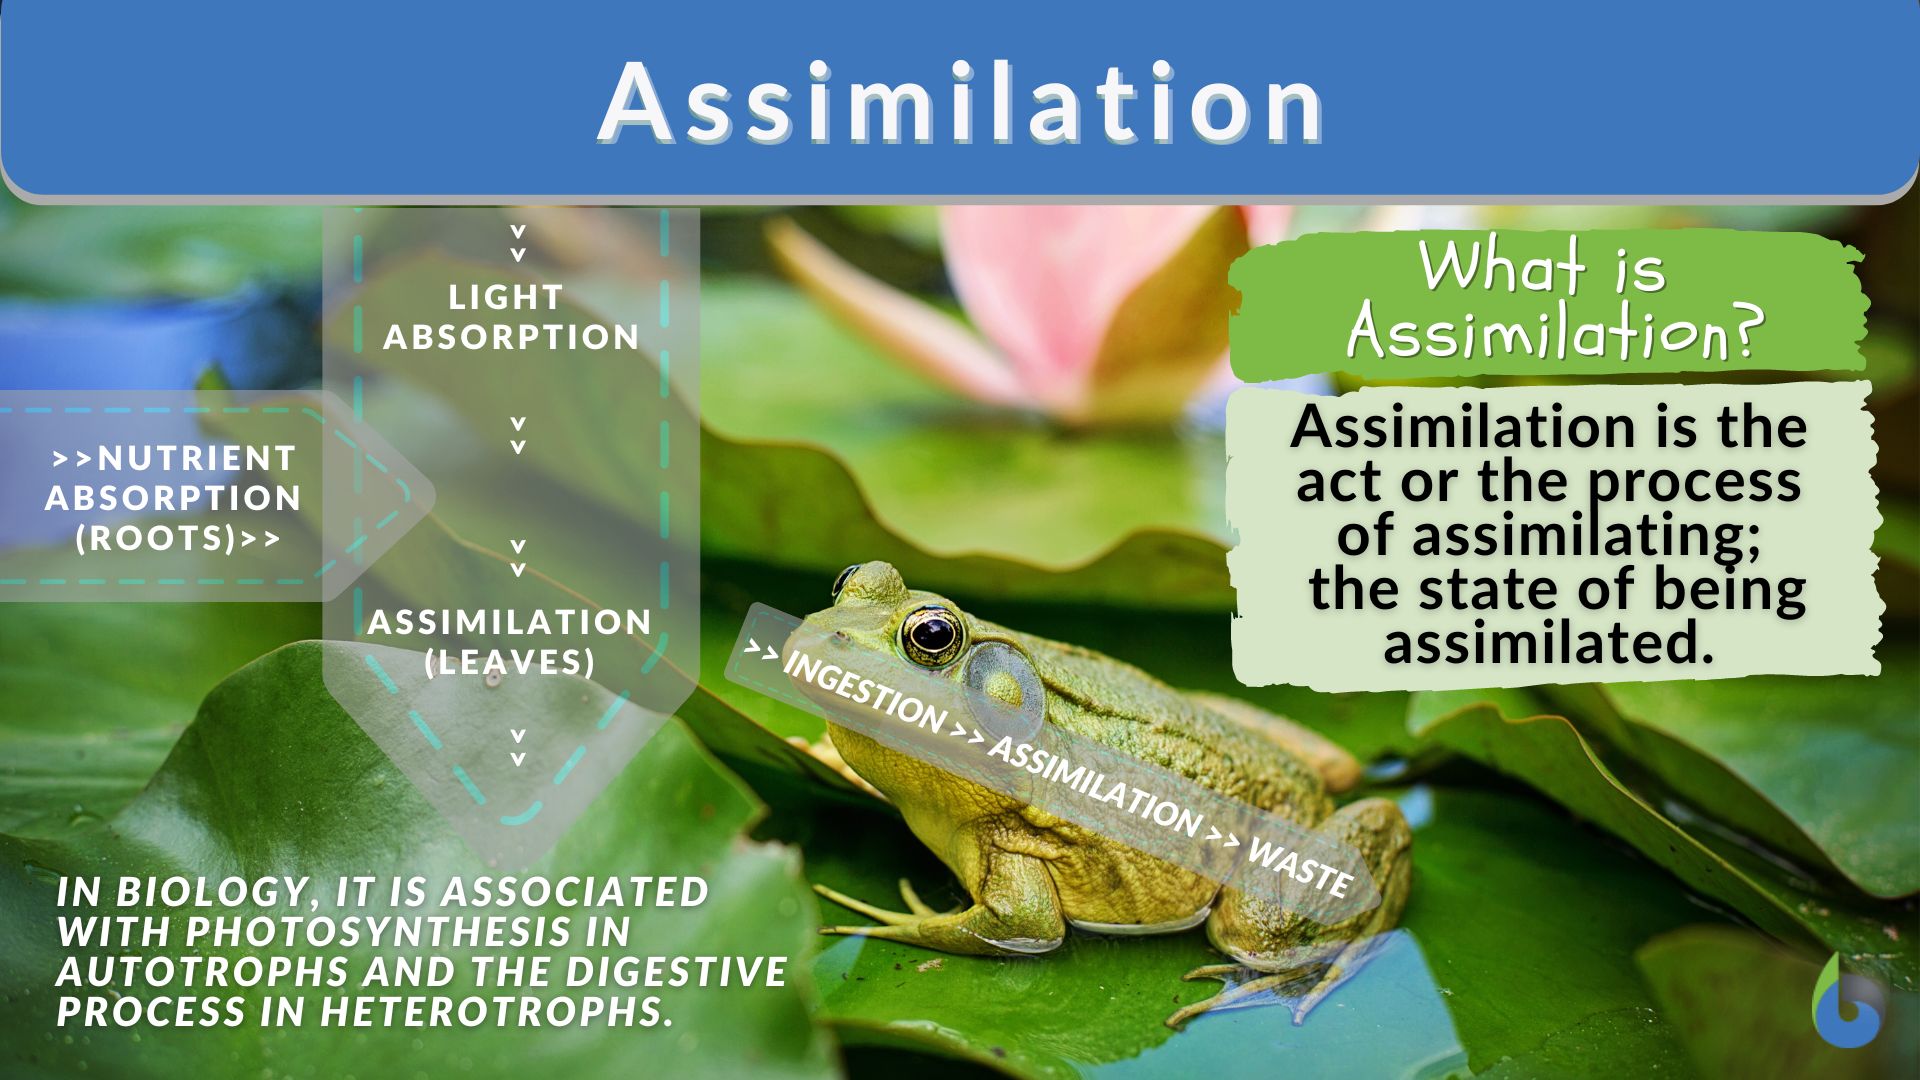 Assimilation - Definition and Examples - Biology Online Dictionary